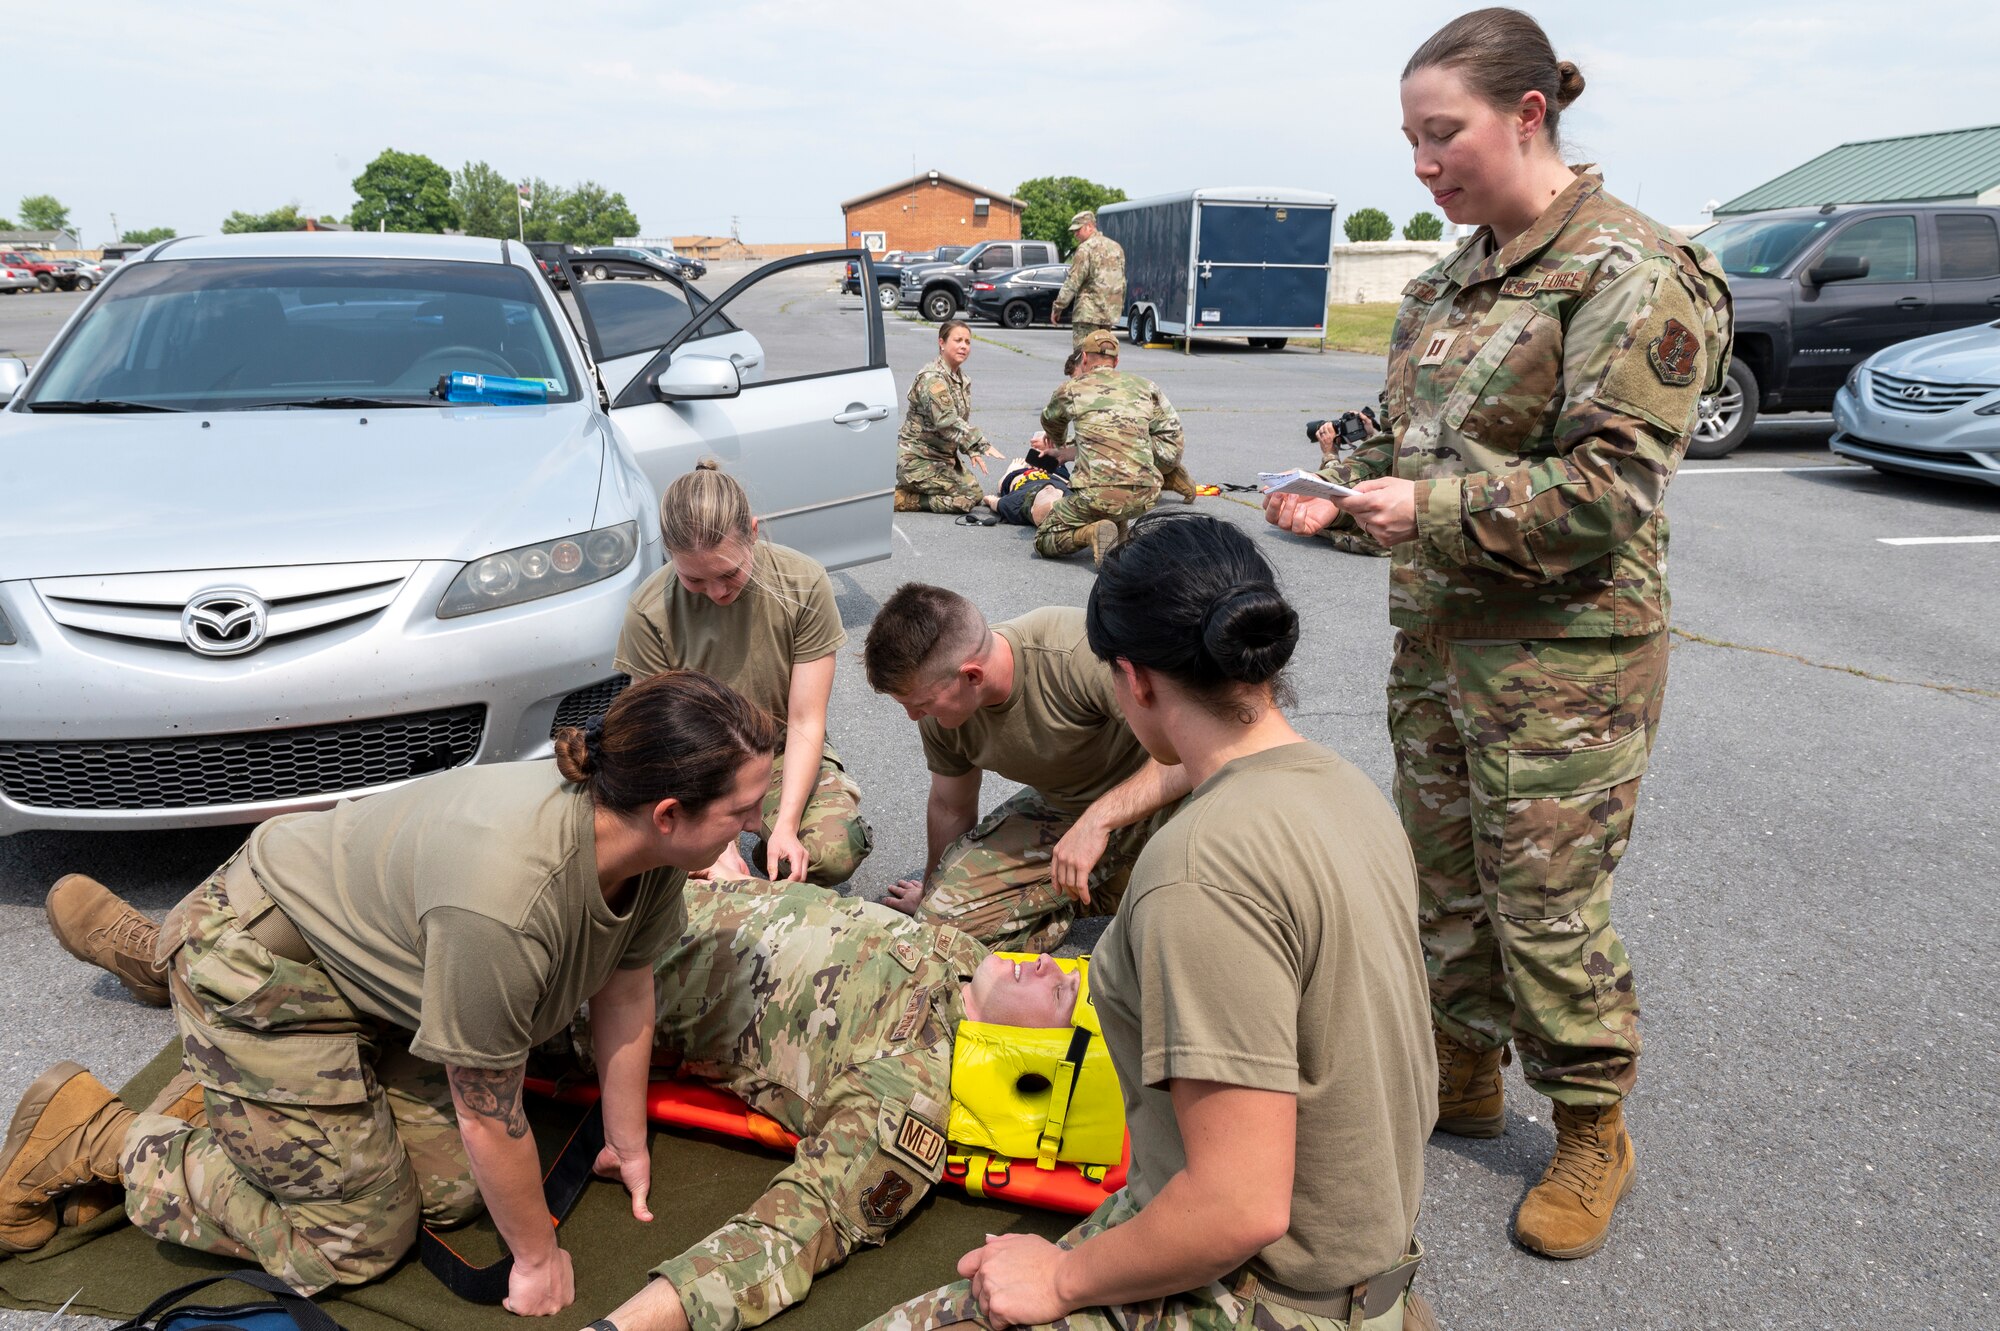 Capt. Hanna Staubs, 167th Medical Group, right, provides instruction to medical services Airmen during a casualty exercise as part of an extended unit training assembly at Shepherd Field, Martinsburg, West Virginia, June 9, 2023.